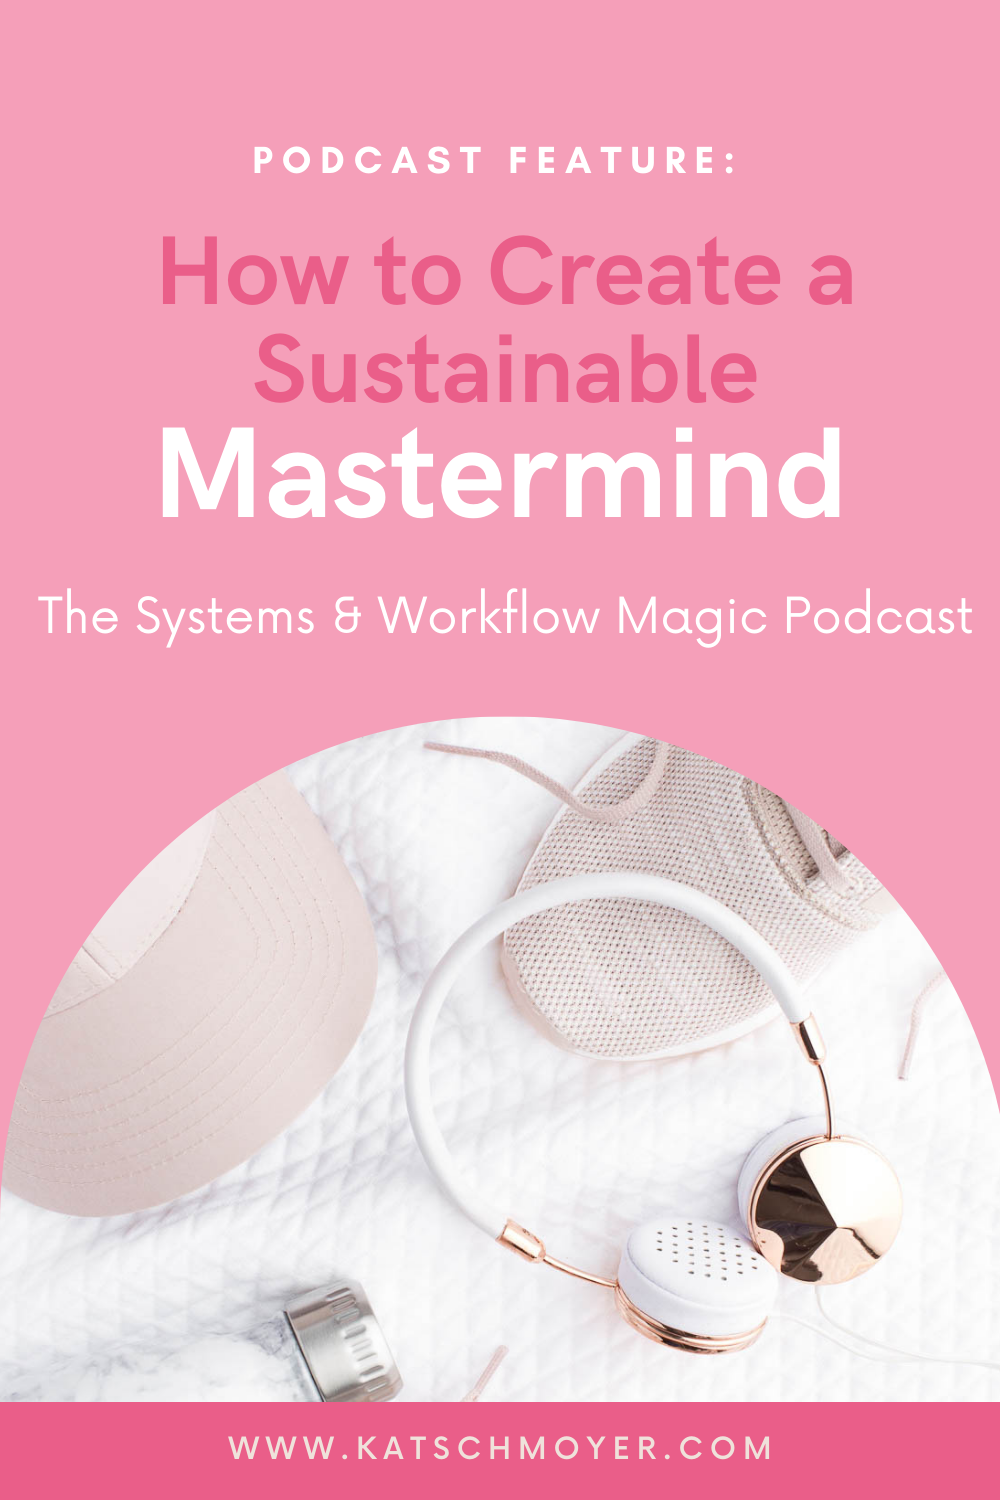 How to Create a Sustainable Mastermind